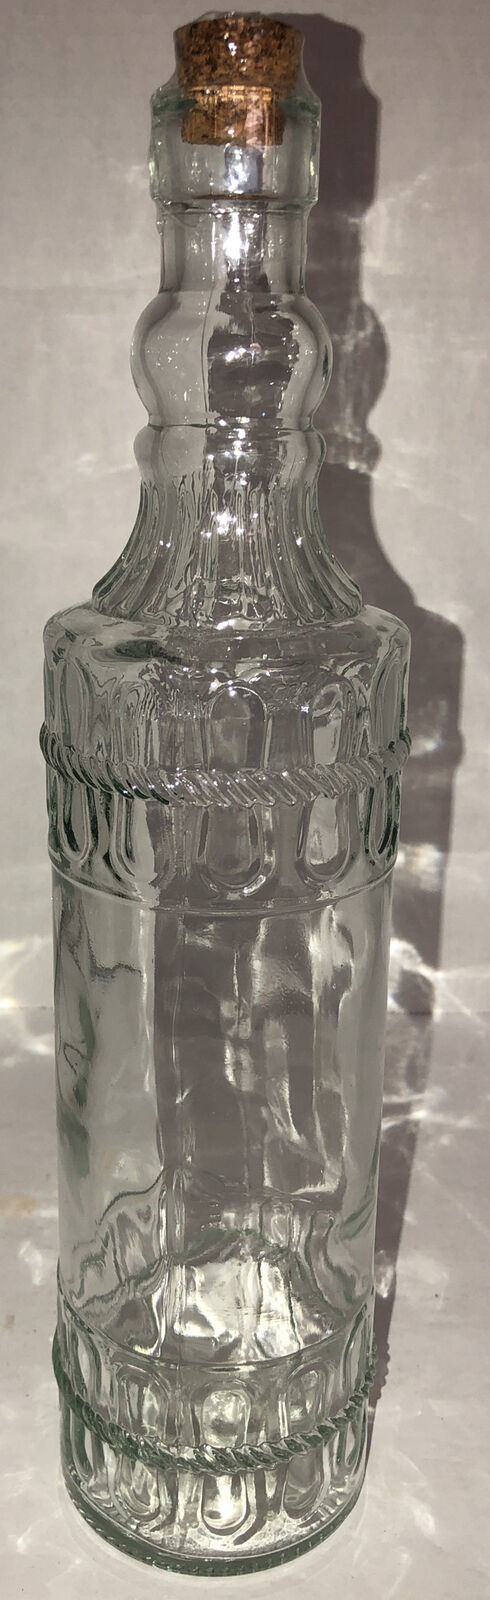 Primary image for Holiday Xmas Glass Decorating Bottle 12.25” Tall Clear W Cork Raised Design NEW